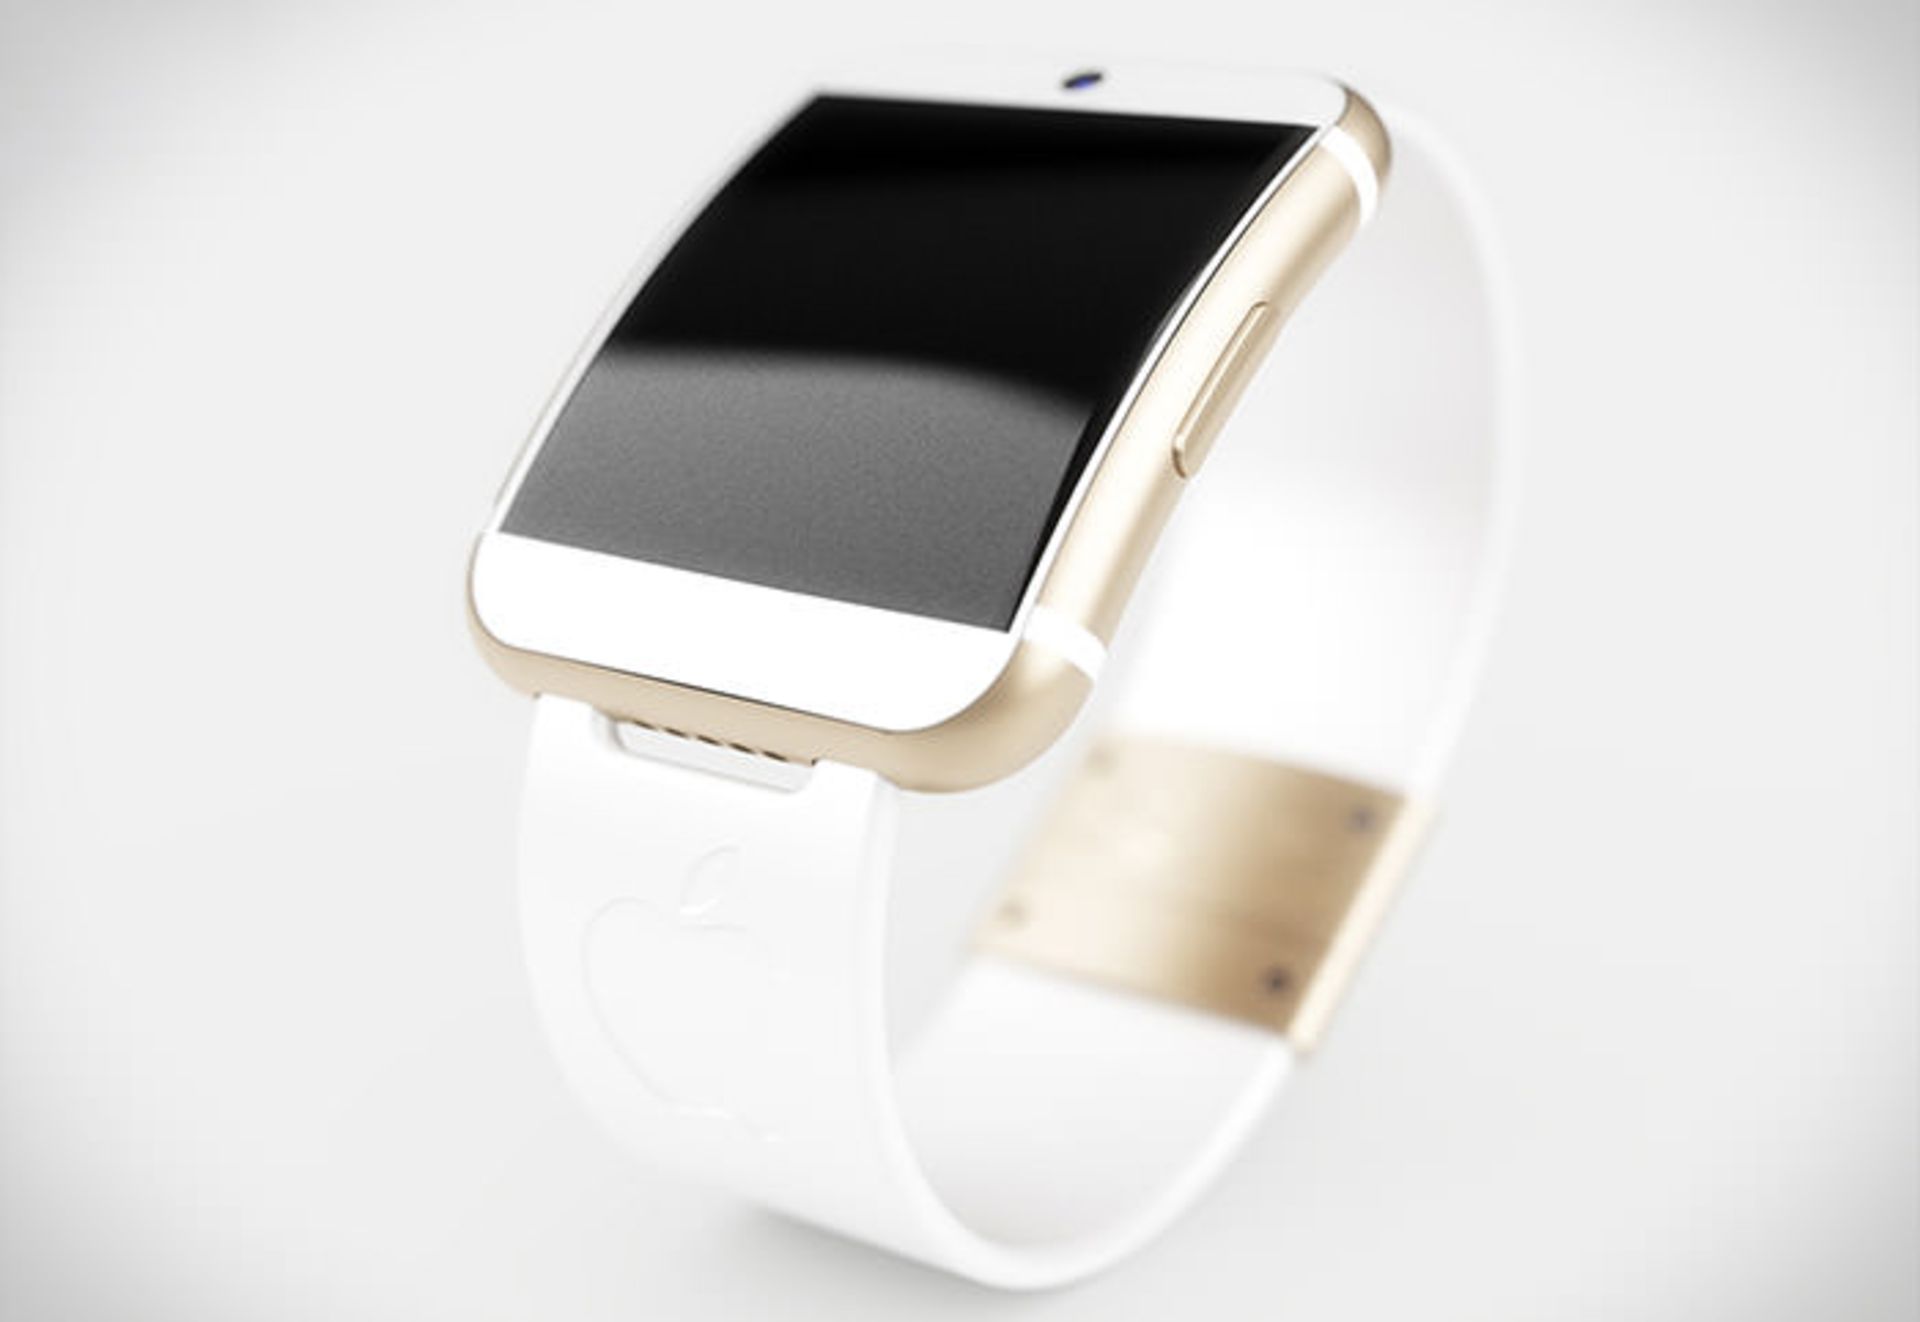 7Apple-iWatch-concept-shows-dreamy-curves-iPhone-esque-looks